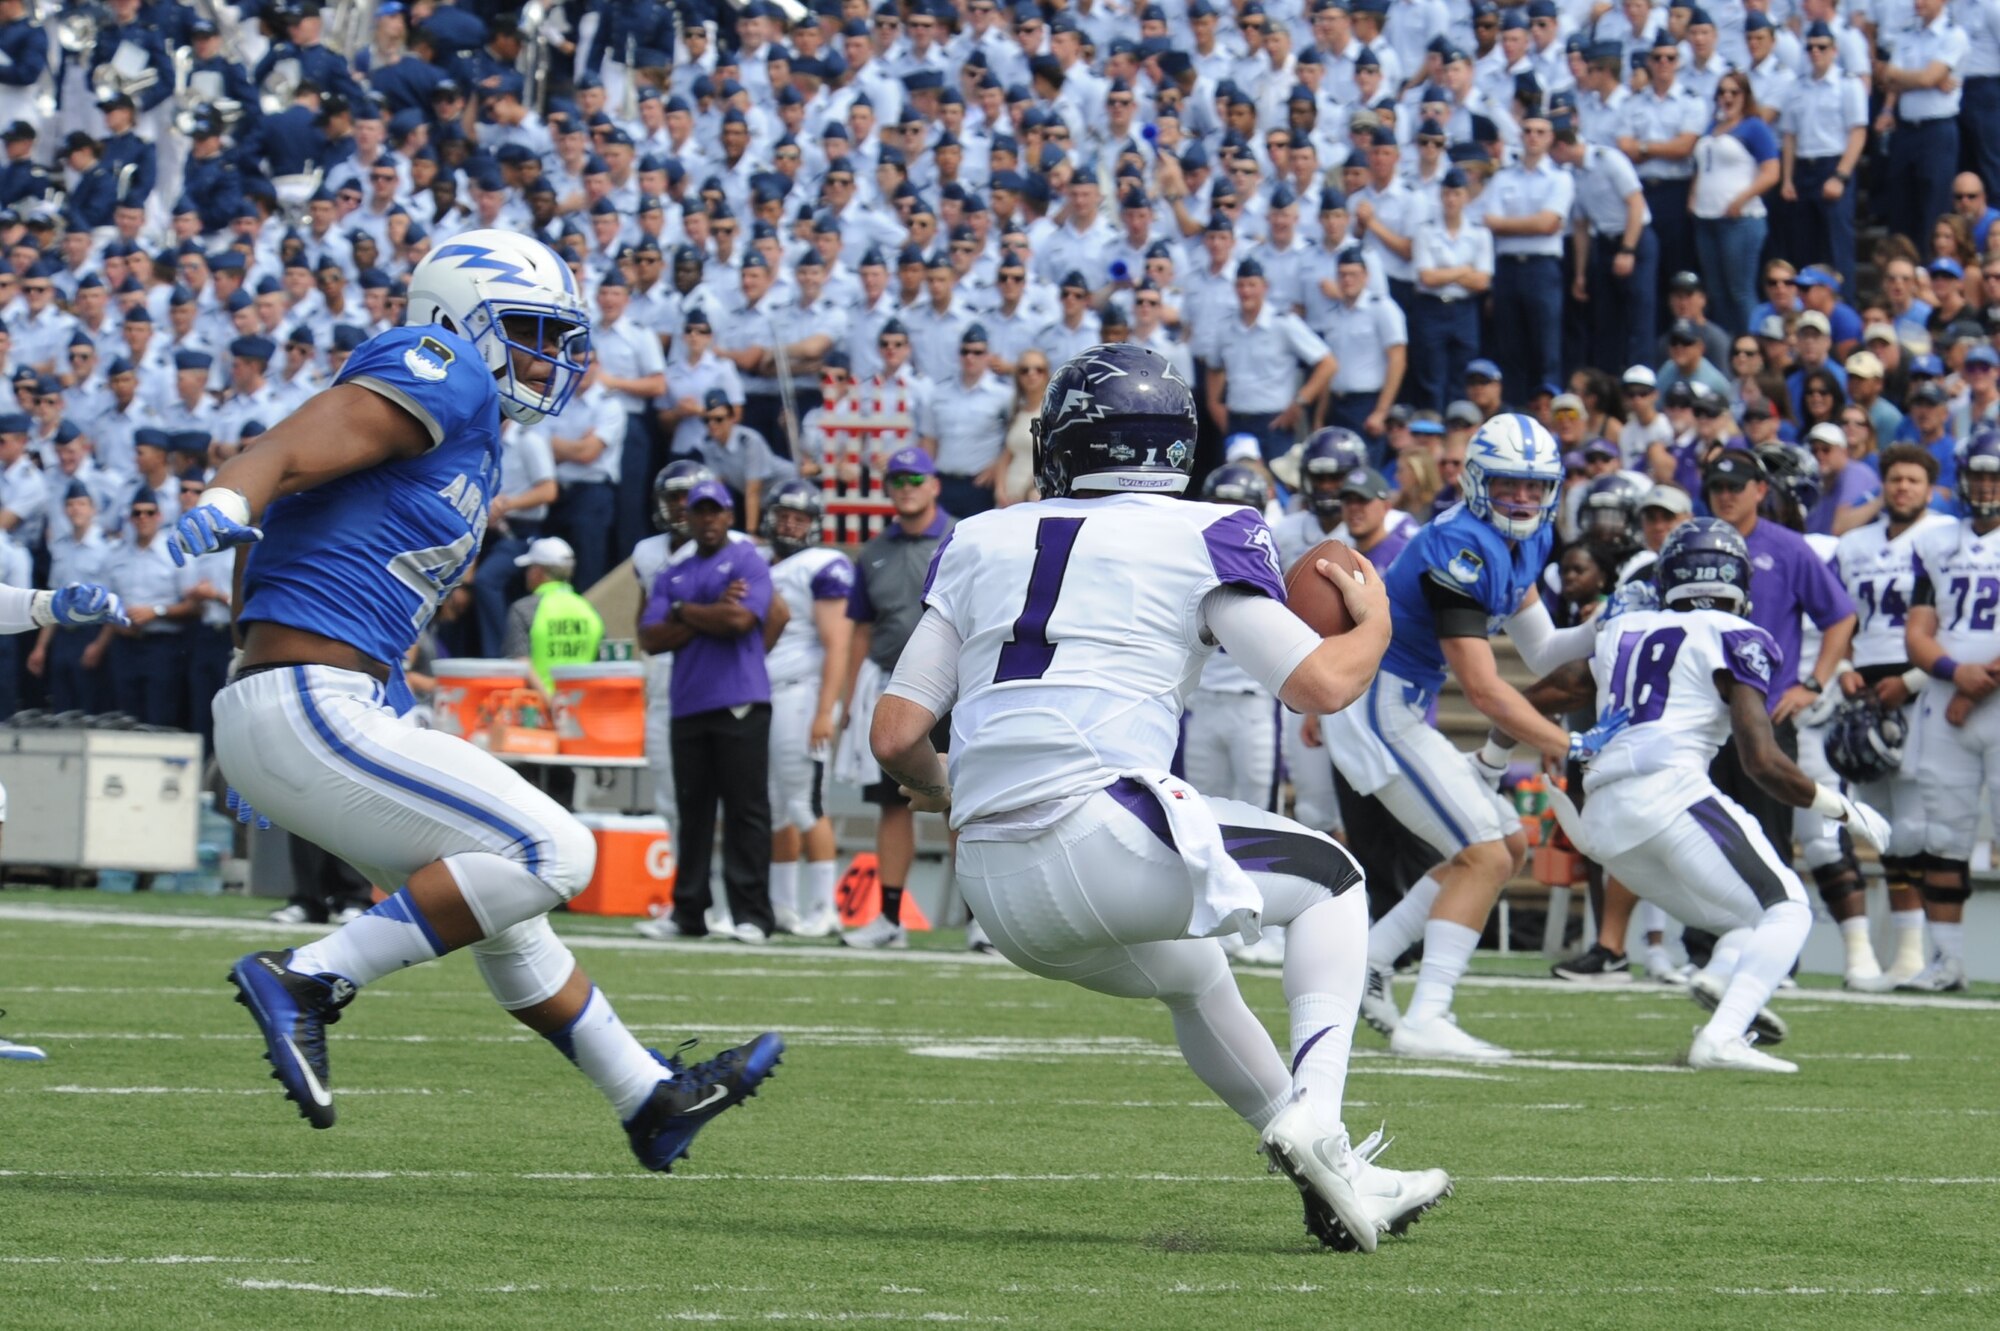 Air Force Academy defensive end Ryan Watson, left, disrupts a play and prepares to abruptly introduce himself to a quarterback, during the Academy’s 2016 win over Abilene Christian University. Watson played three seasons at defensive end and one at outside linebacker at the Air Force Academy.  Now a program manager with AFLCMC, Watson has been invited to the Detroit Lions rookie minicamp, May 10-13. (U.S. Air Force photo/John Van Winkle)